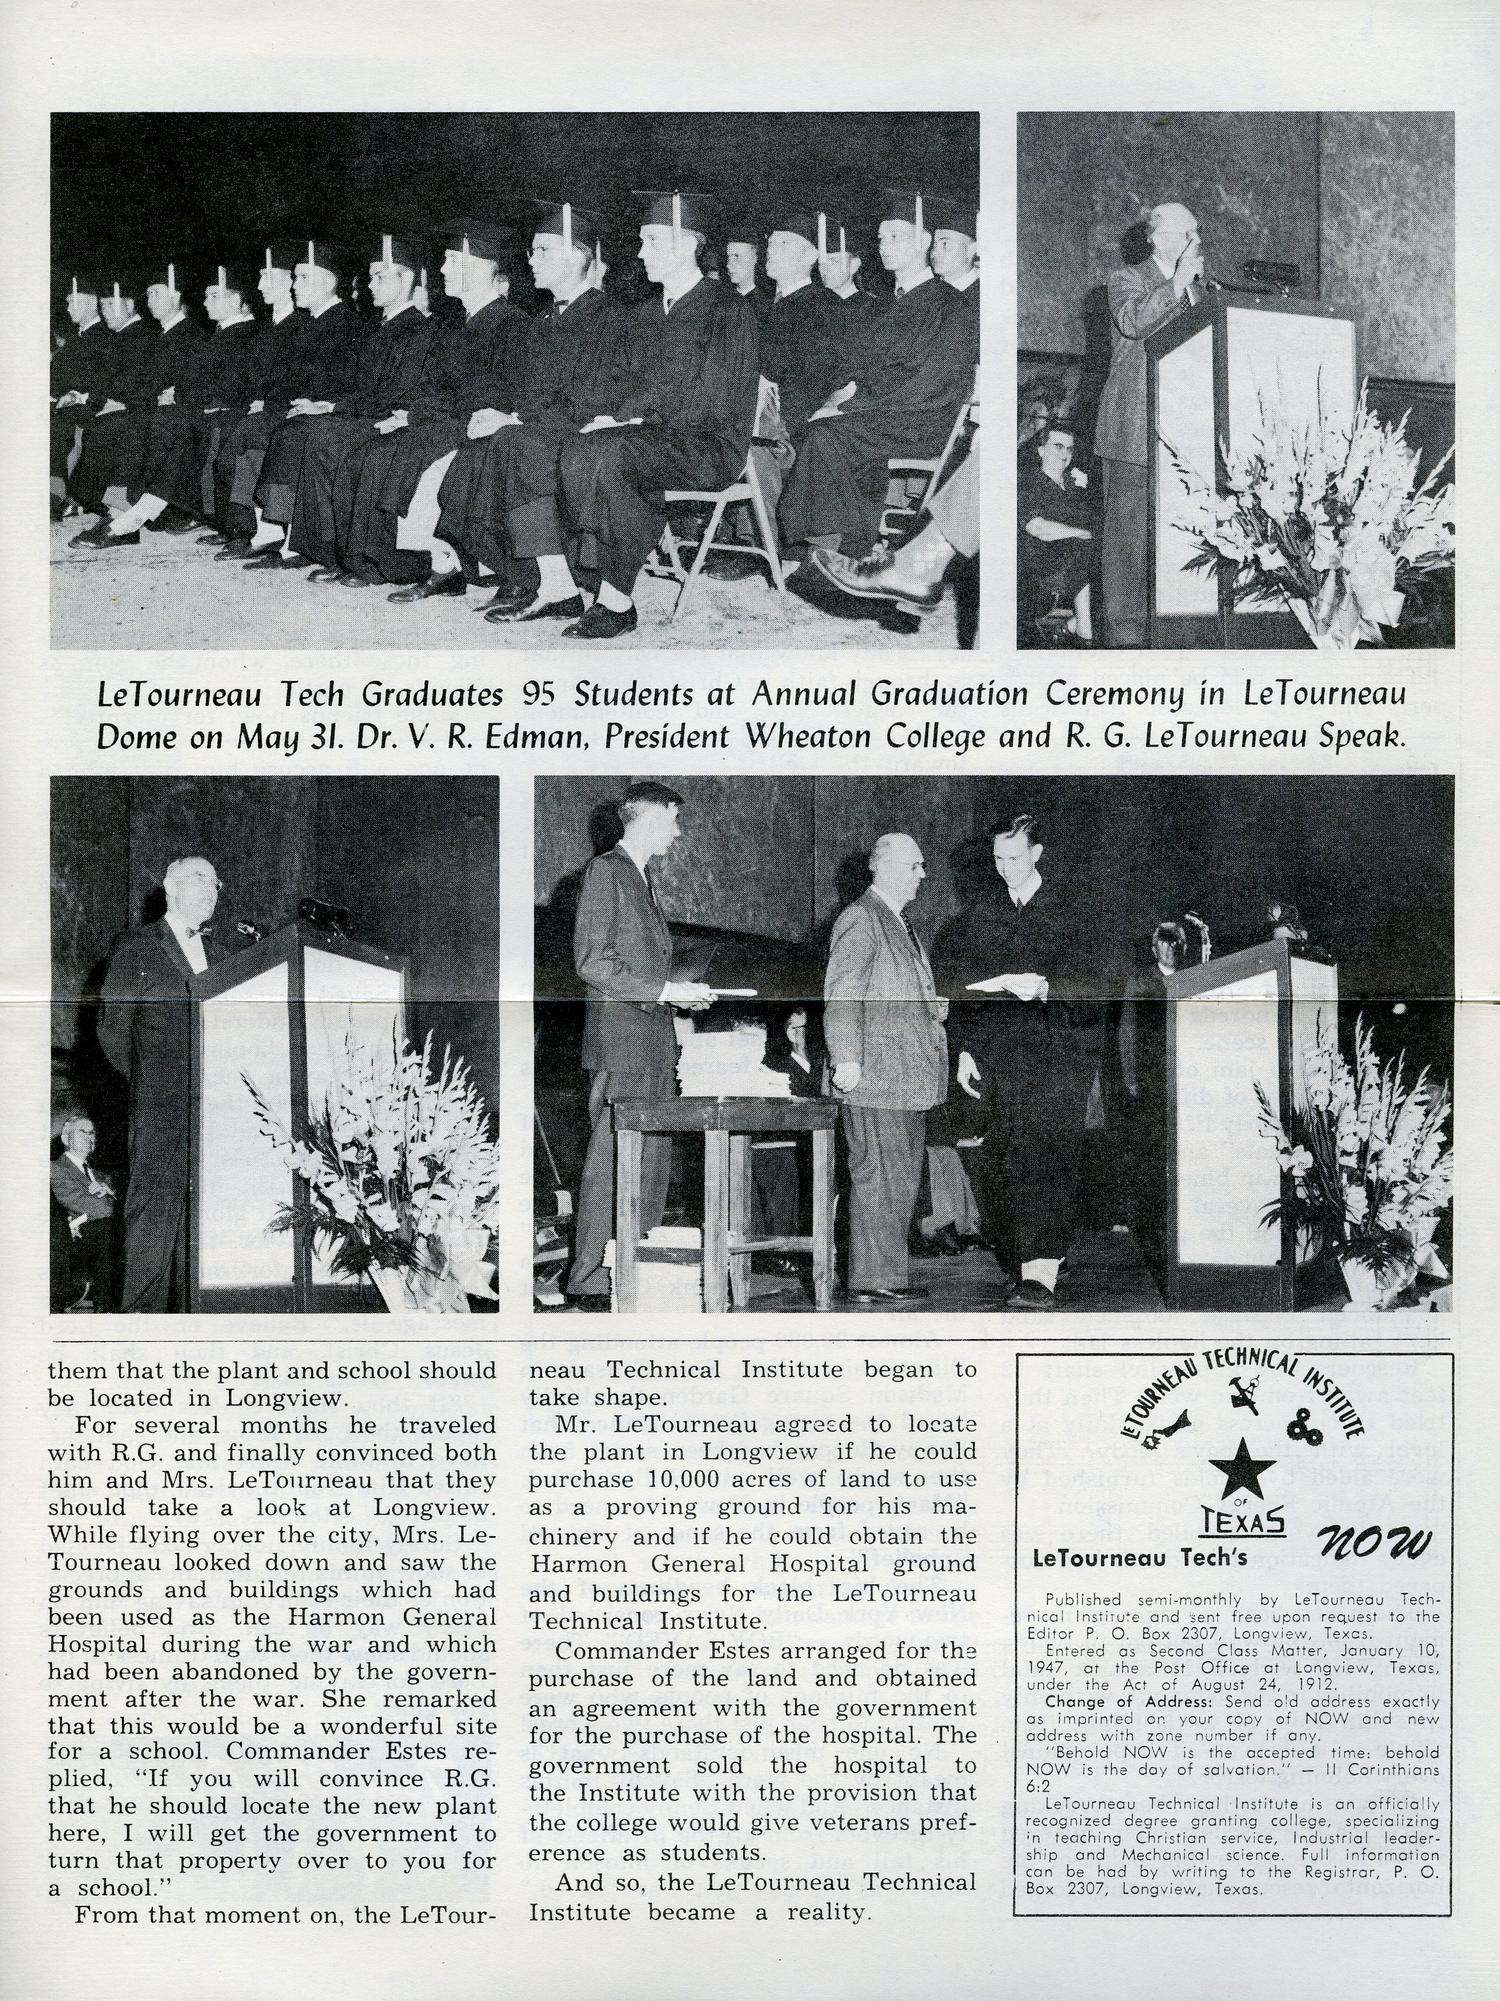 LeTourneau Tech's NOW, Volume 11, Number 13, July 1, 1957
                                                
                                                    5
                                                